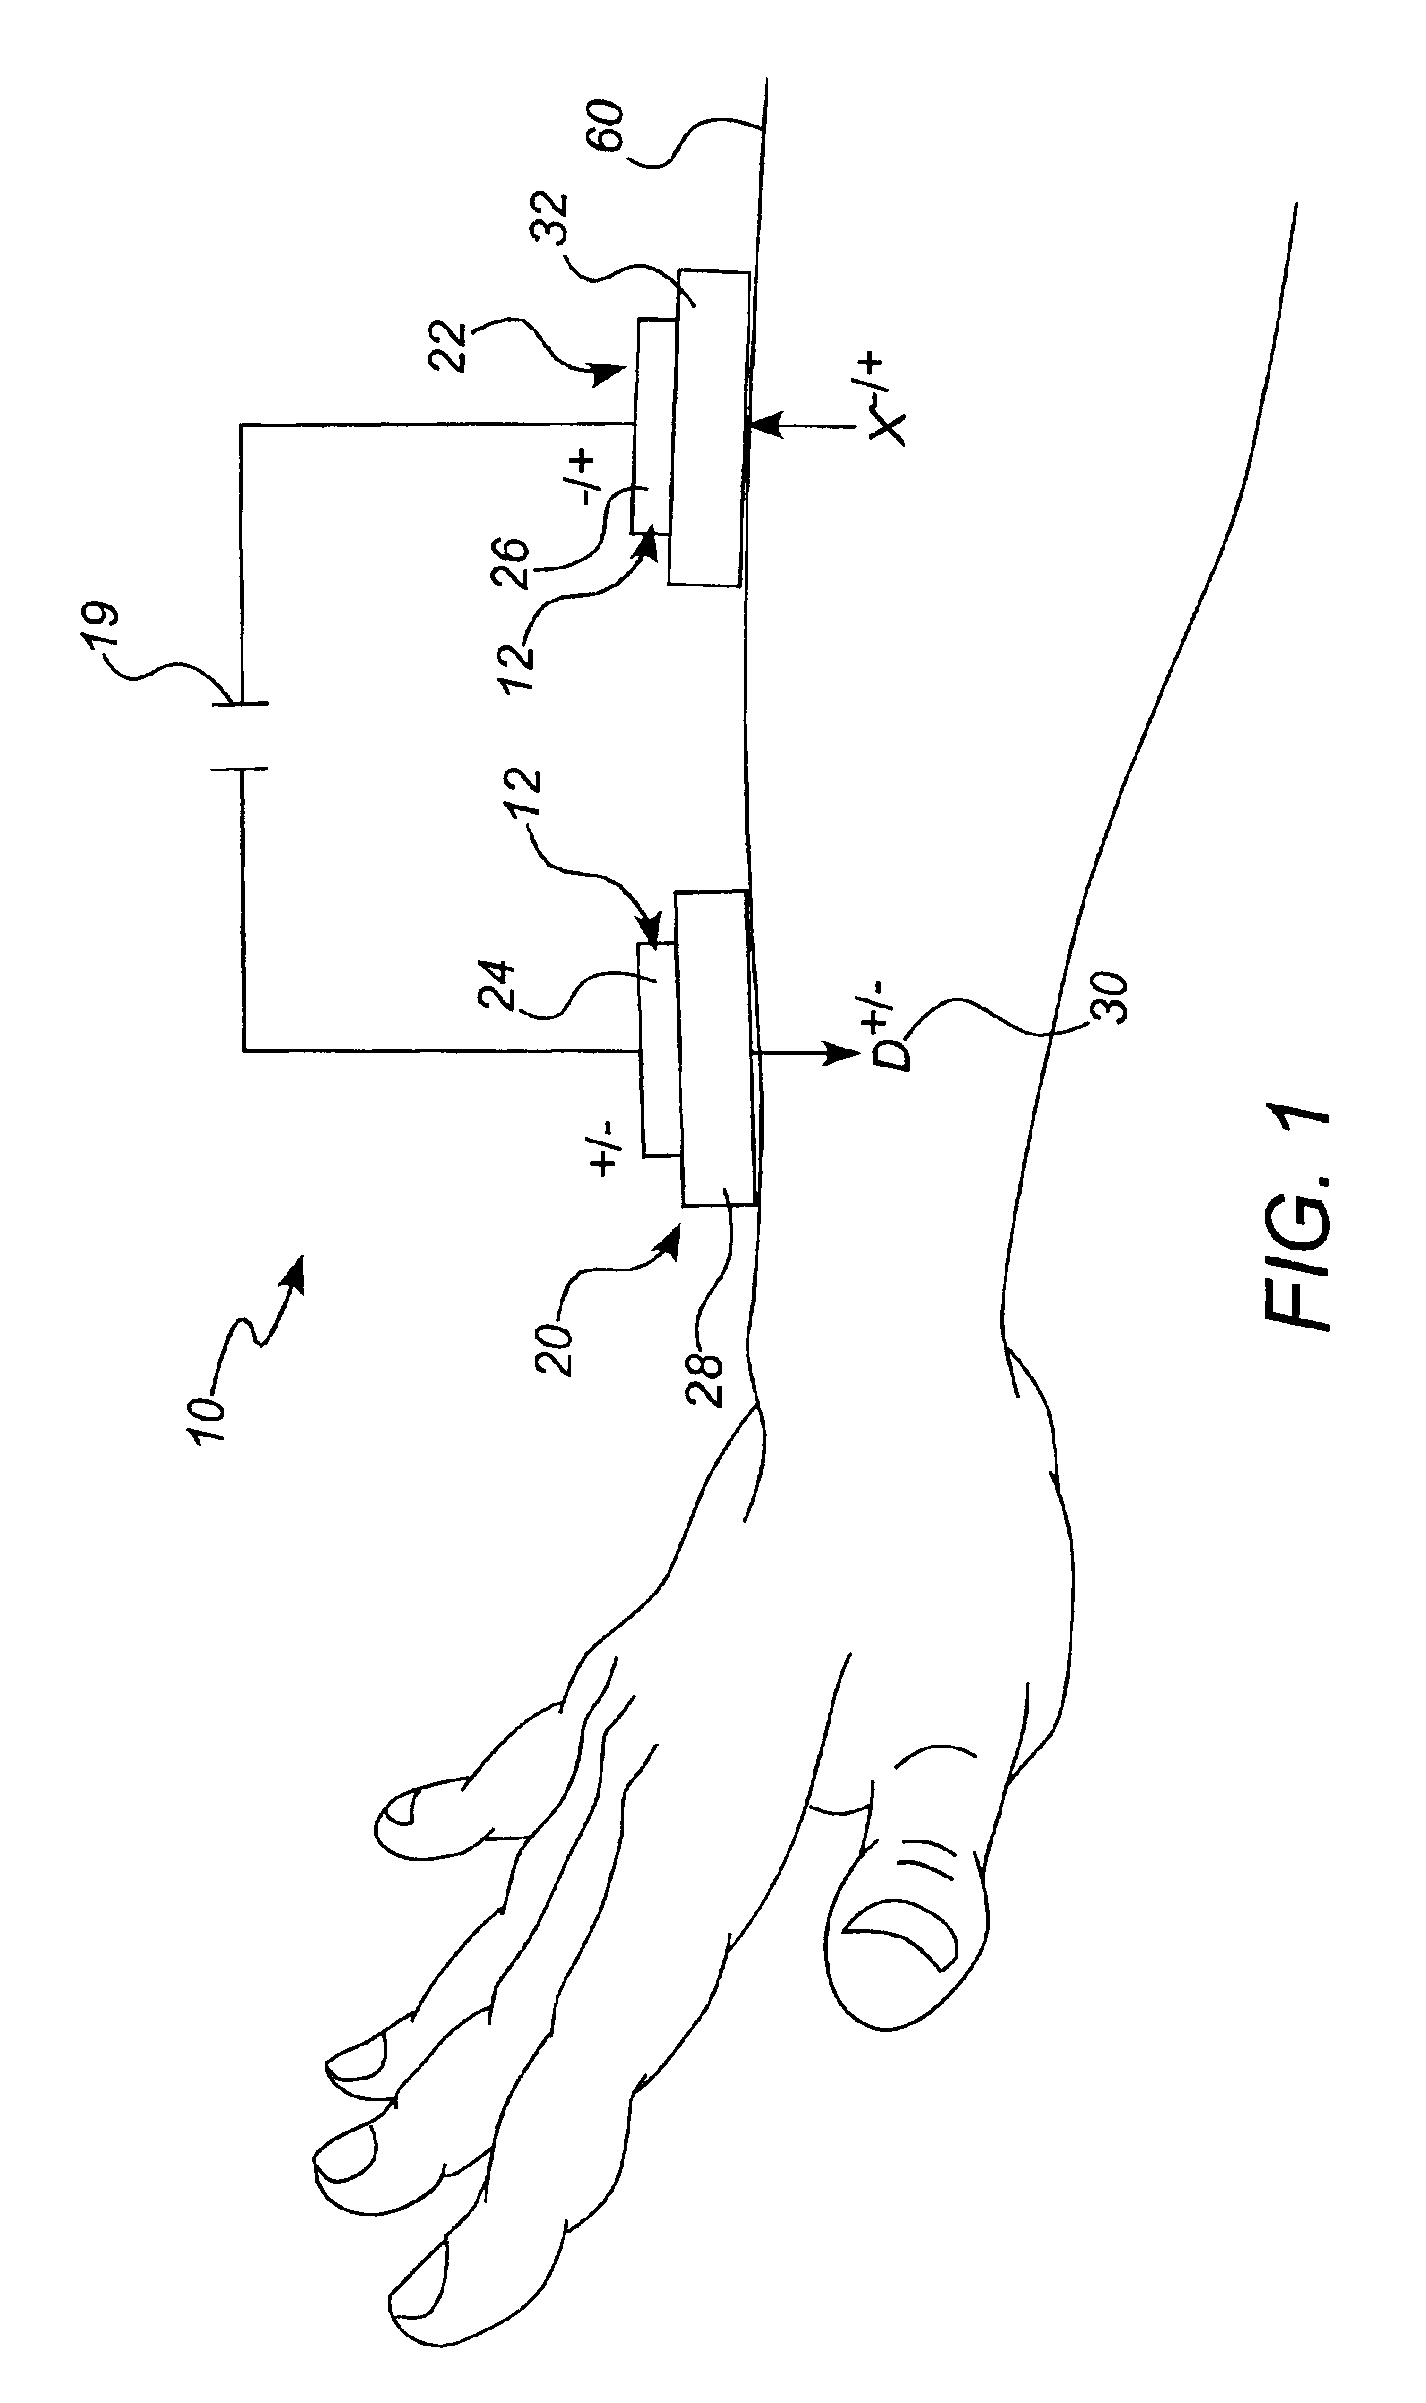 Iontophoretic drug delivery device and reservoir and method of making same